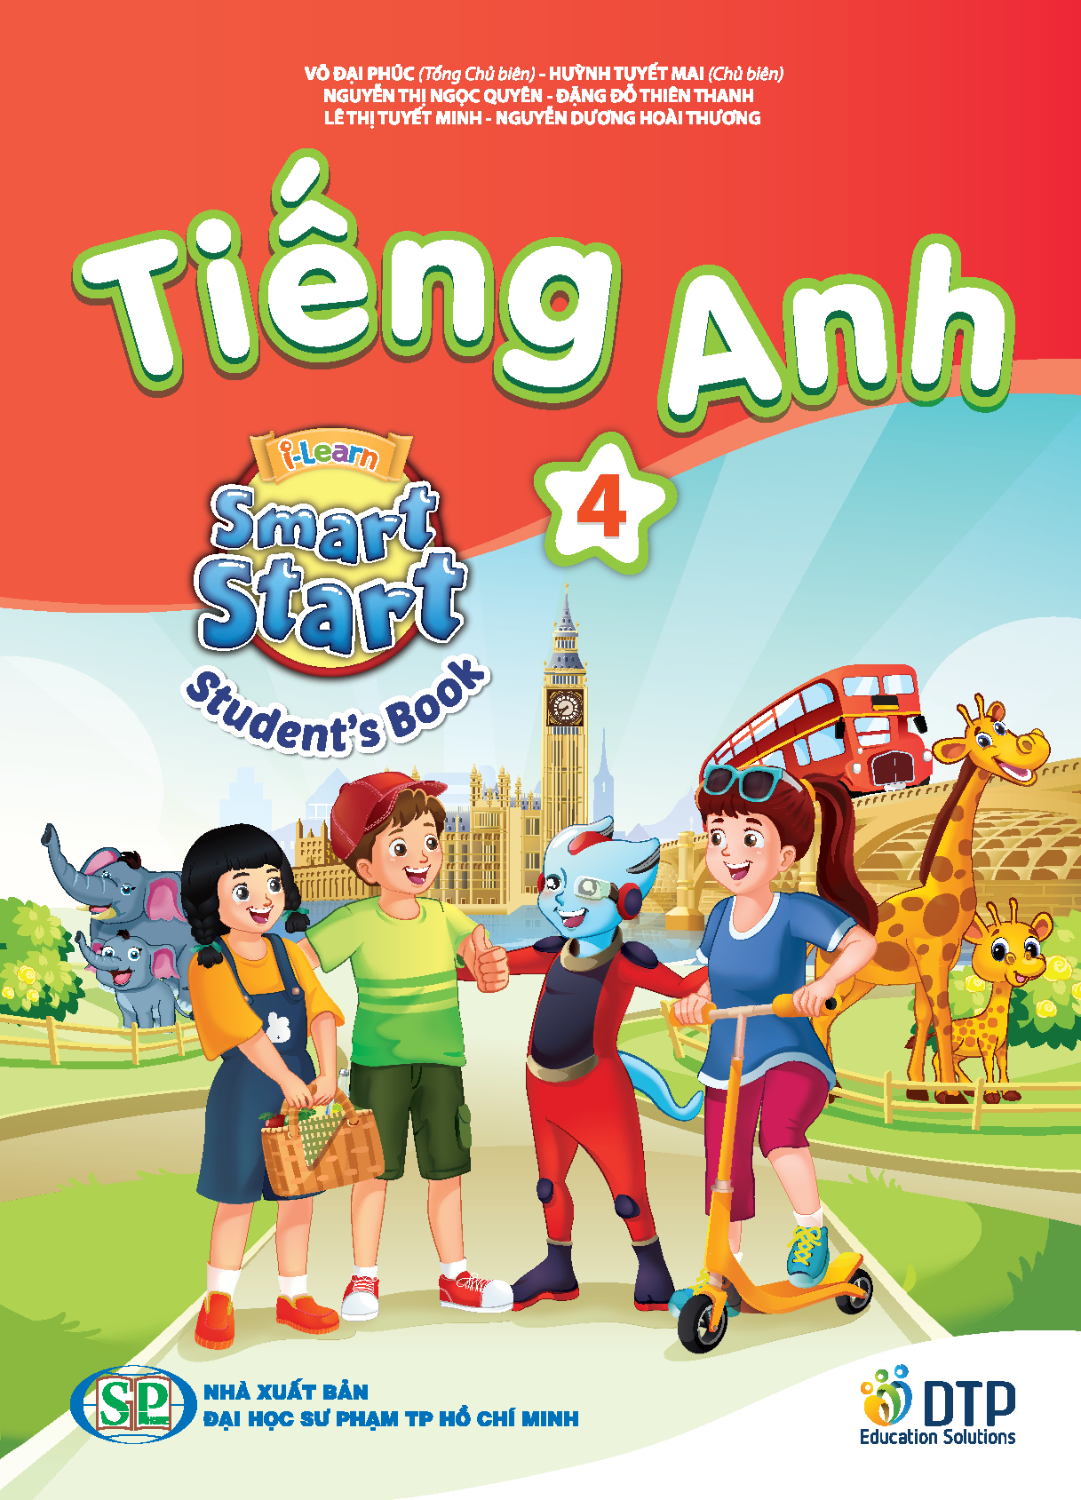 Tiếng Anh i-Learn Smart Start